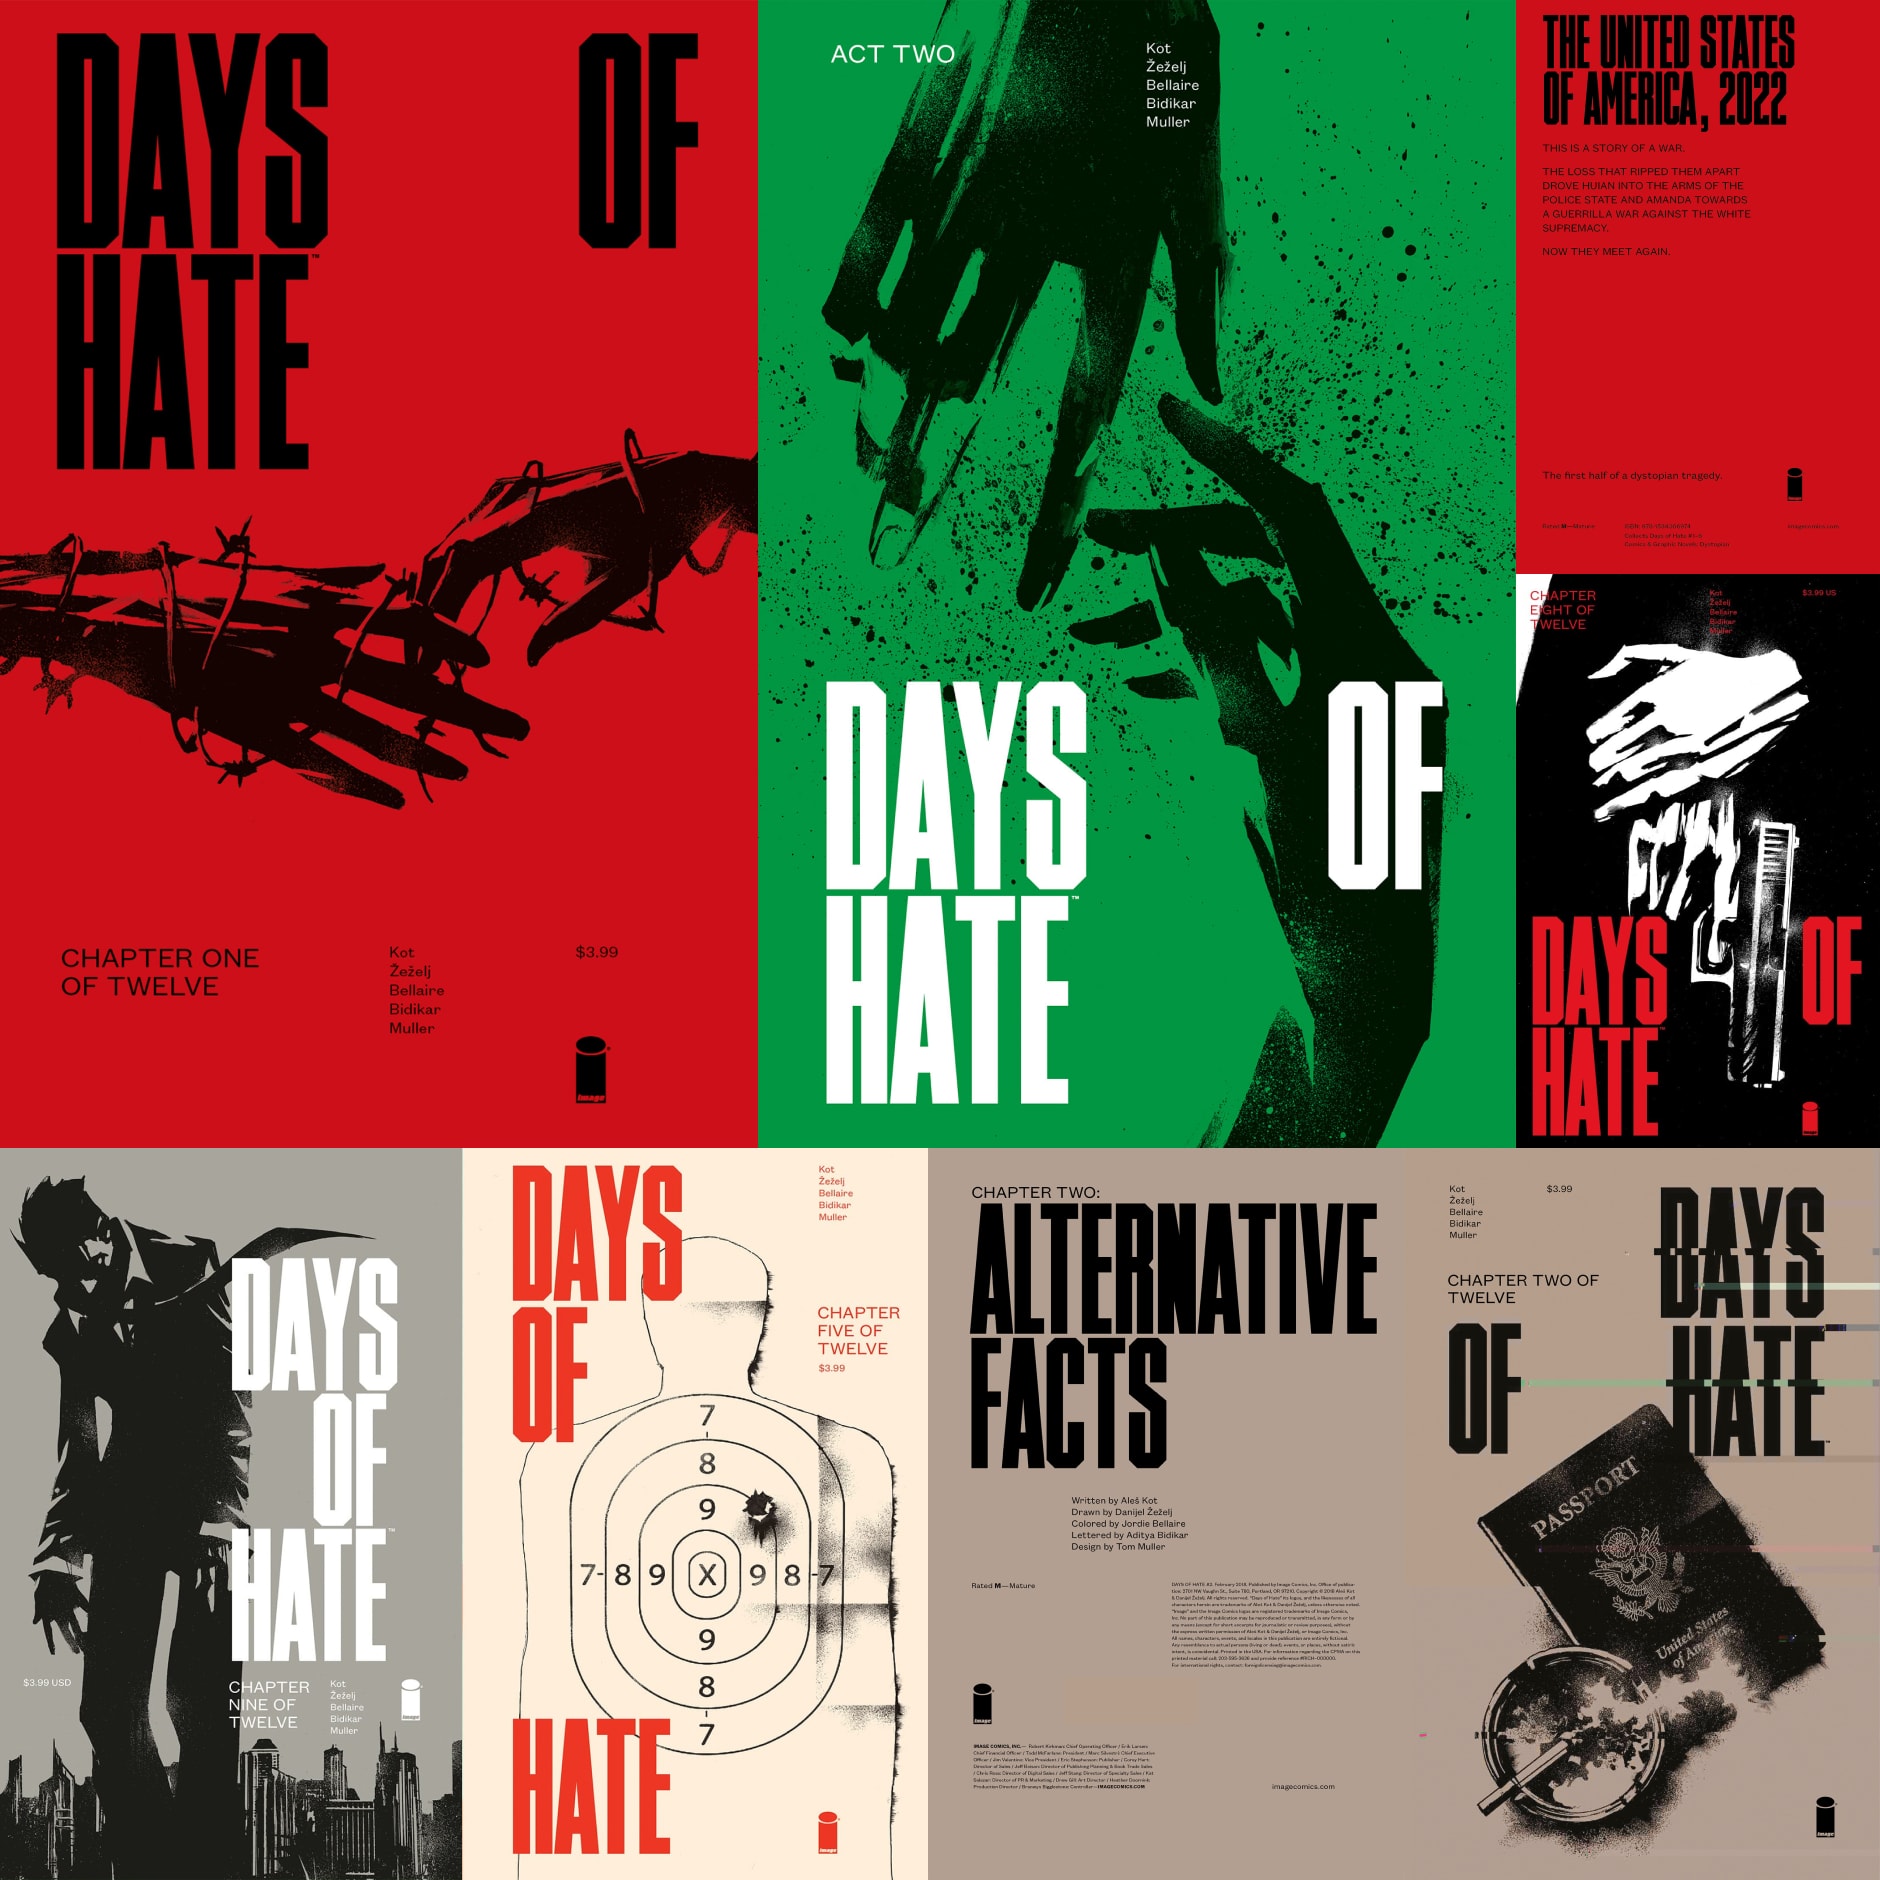 Days of Hate covers